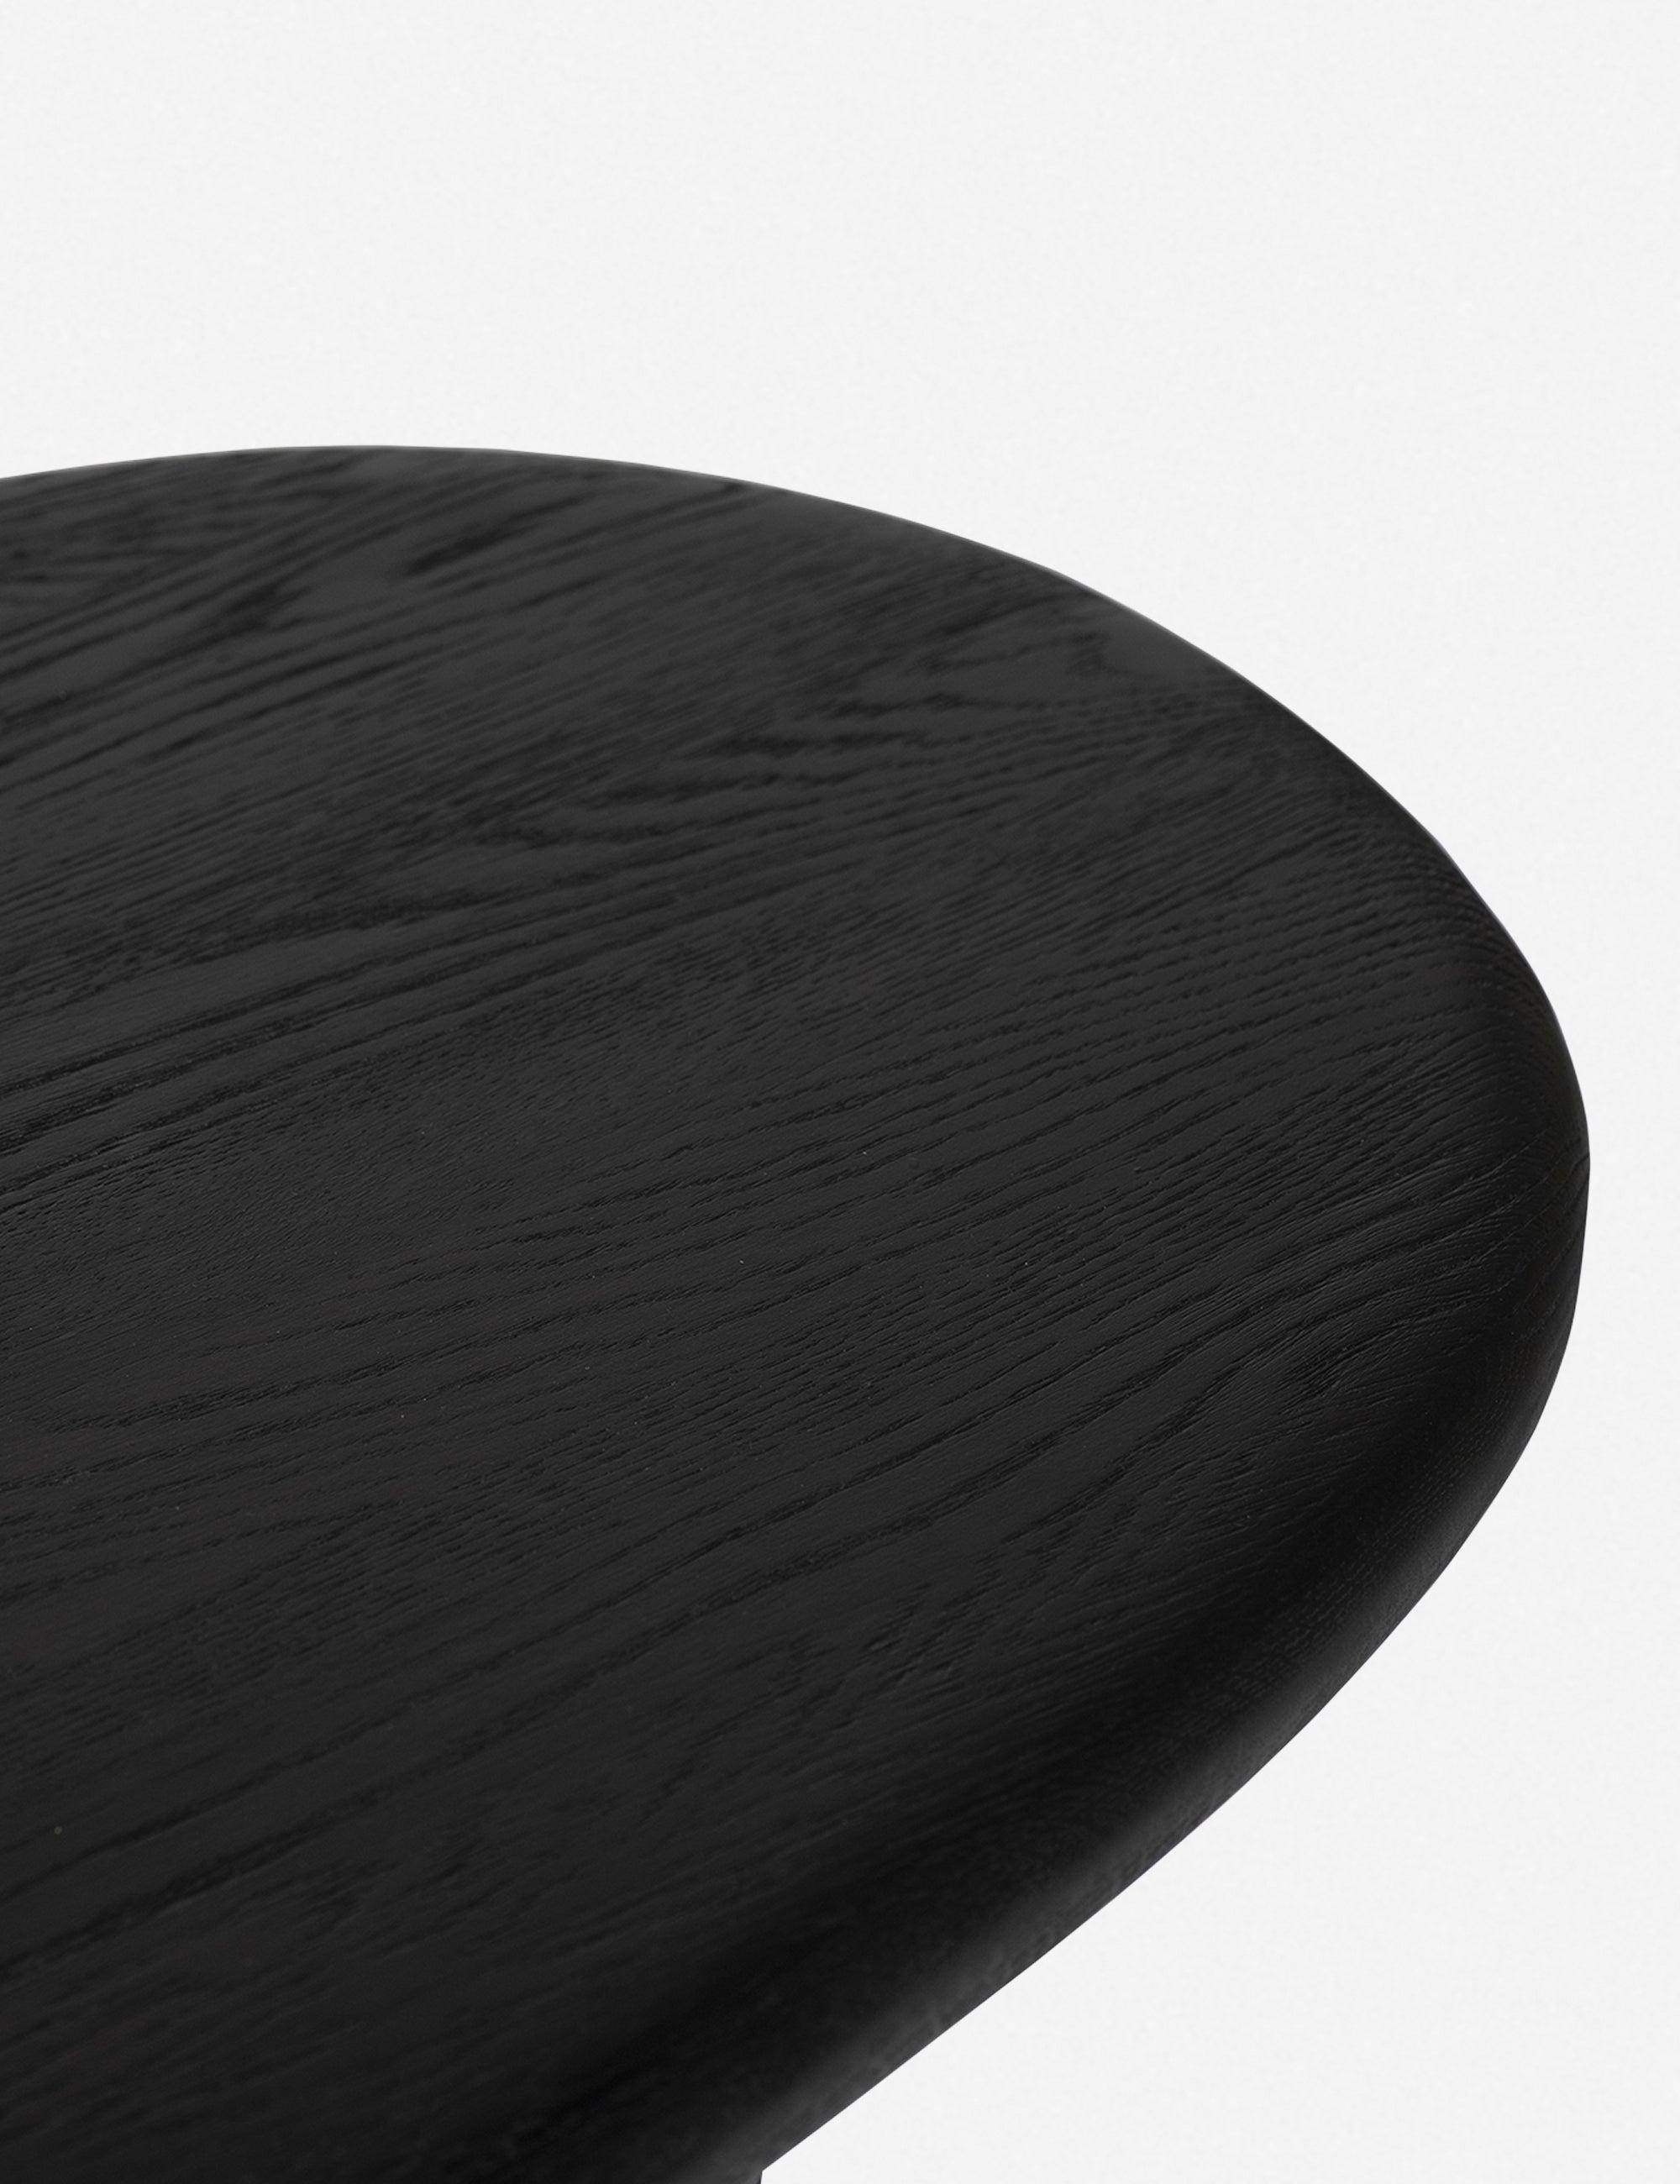 Charcoal Oil-Finished Round Oak Wood Coffee Table